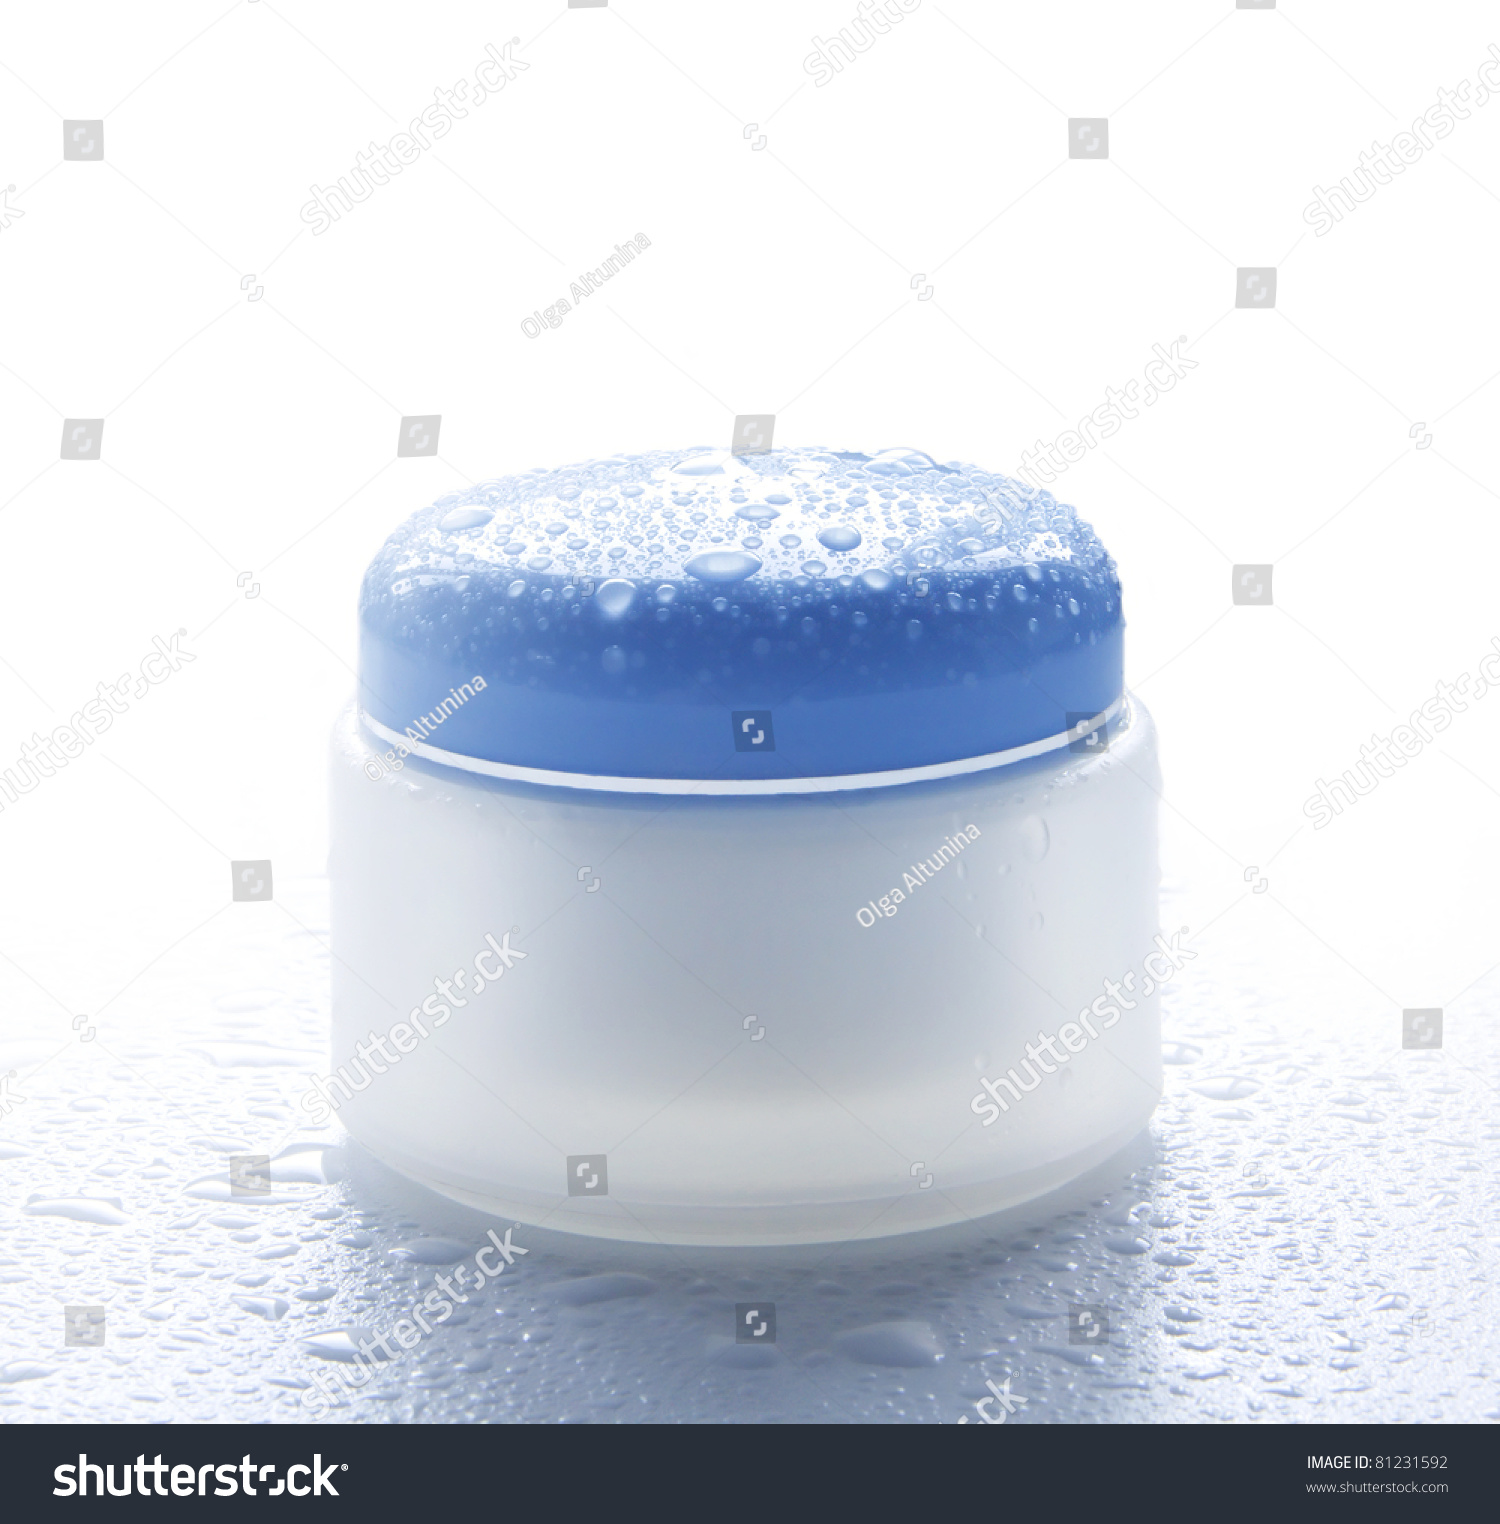 Cosmetic cream for skin care in the water droplets #81231592